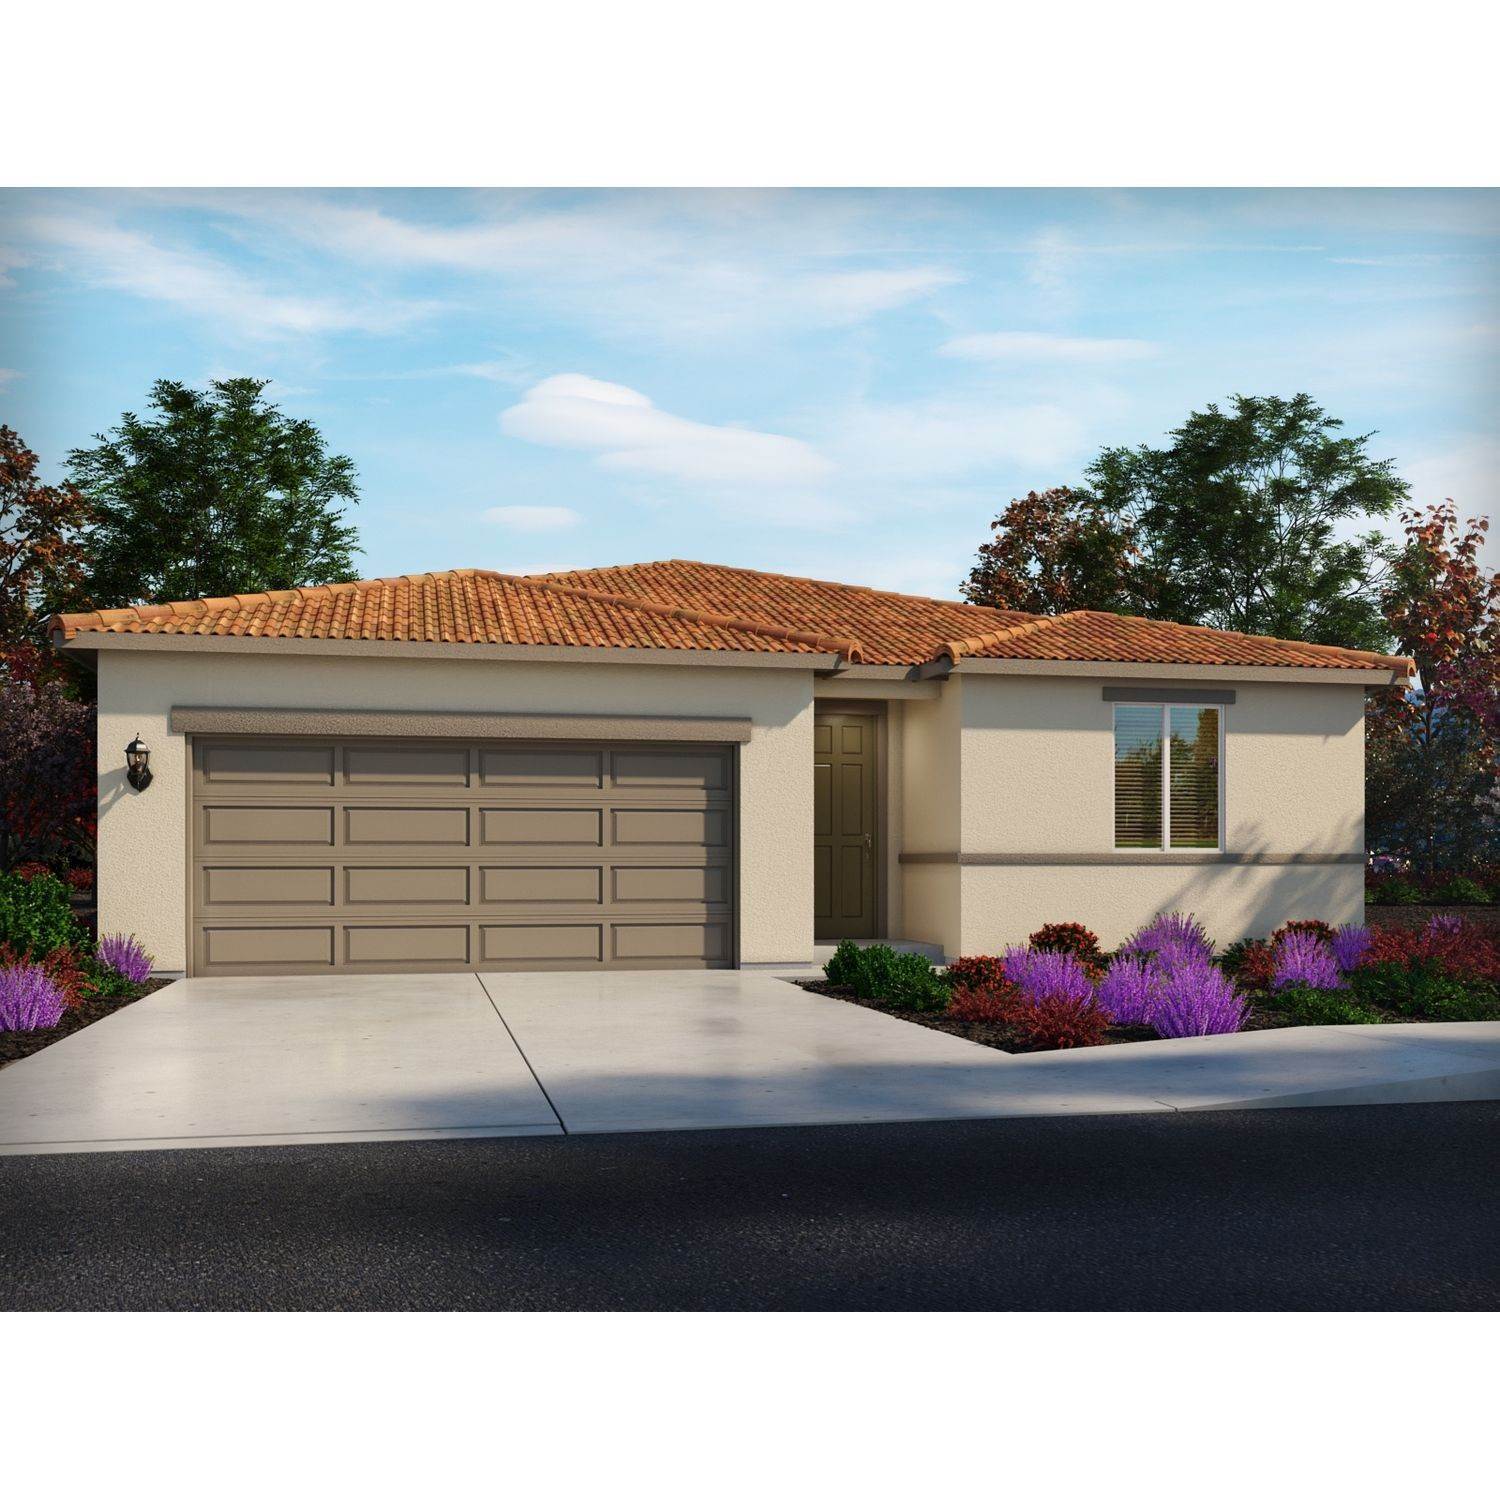 Single Family for Sale at Linden At Arbor Bend 1849 Holland Lane, Manteca, CA 95337